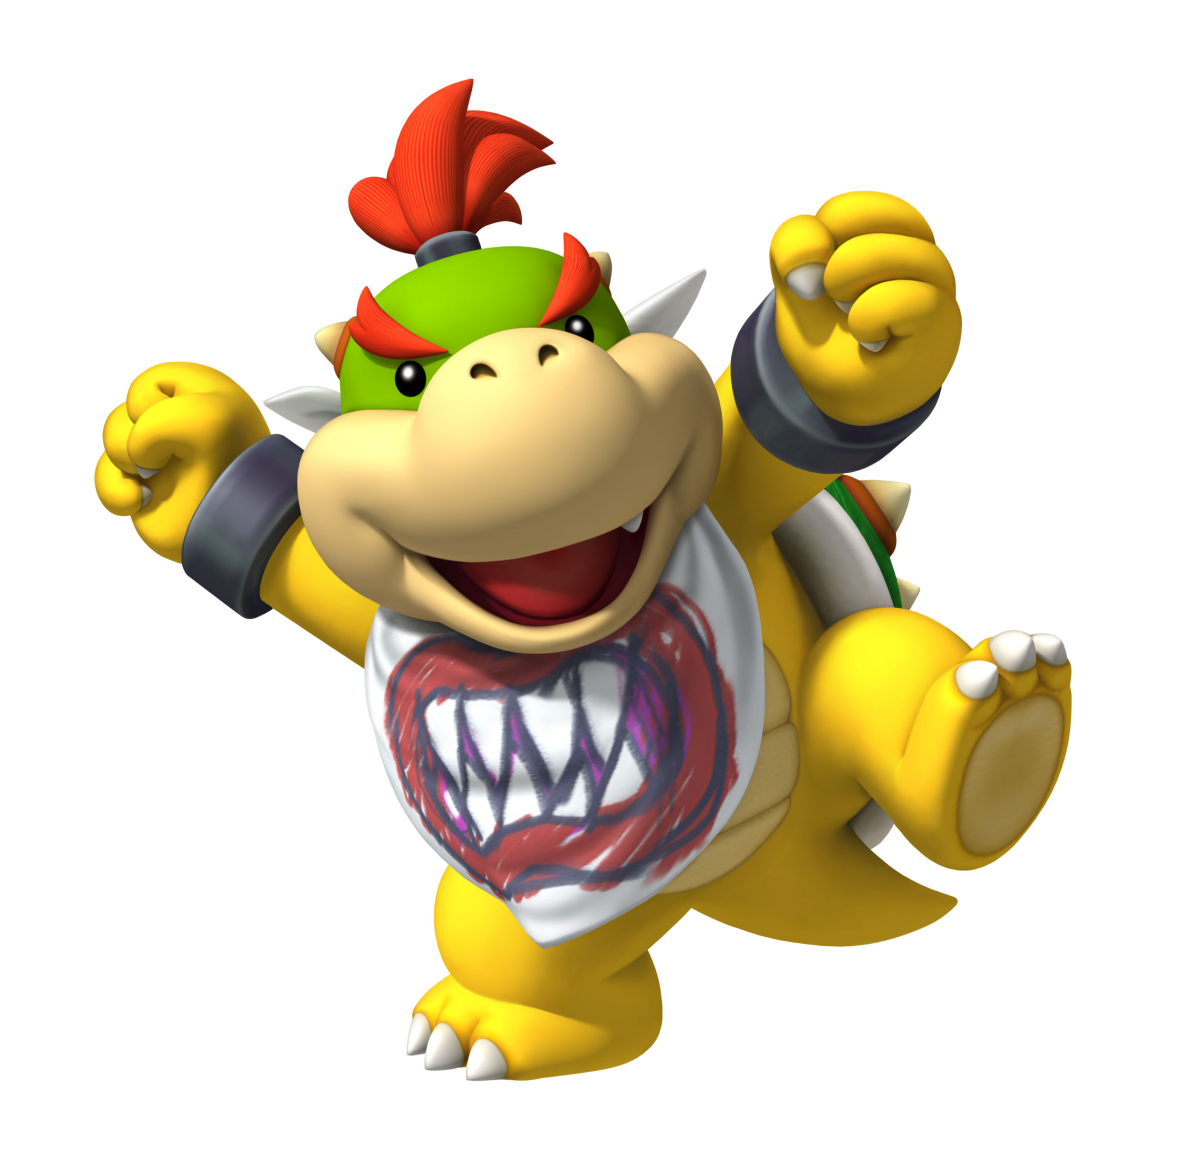 How to draw Bowser Jr.